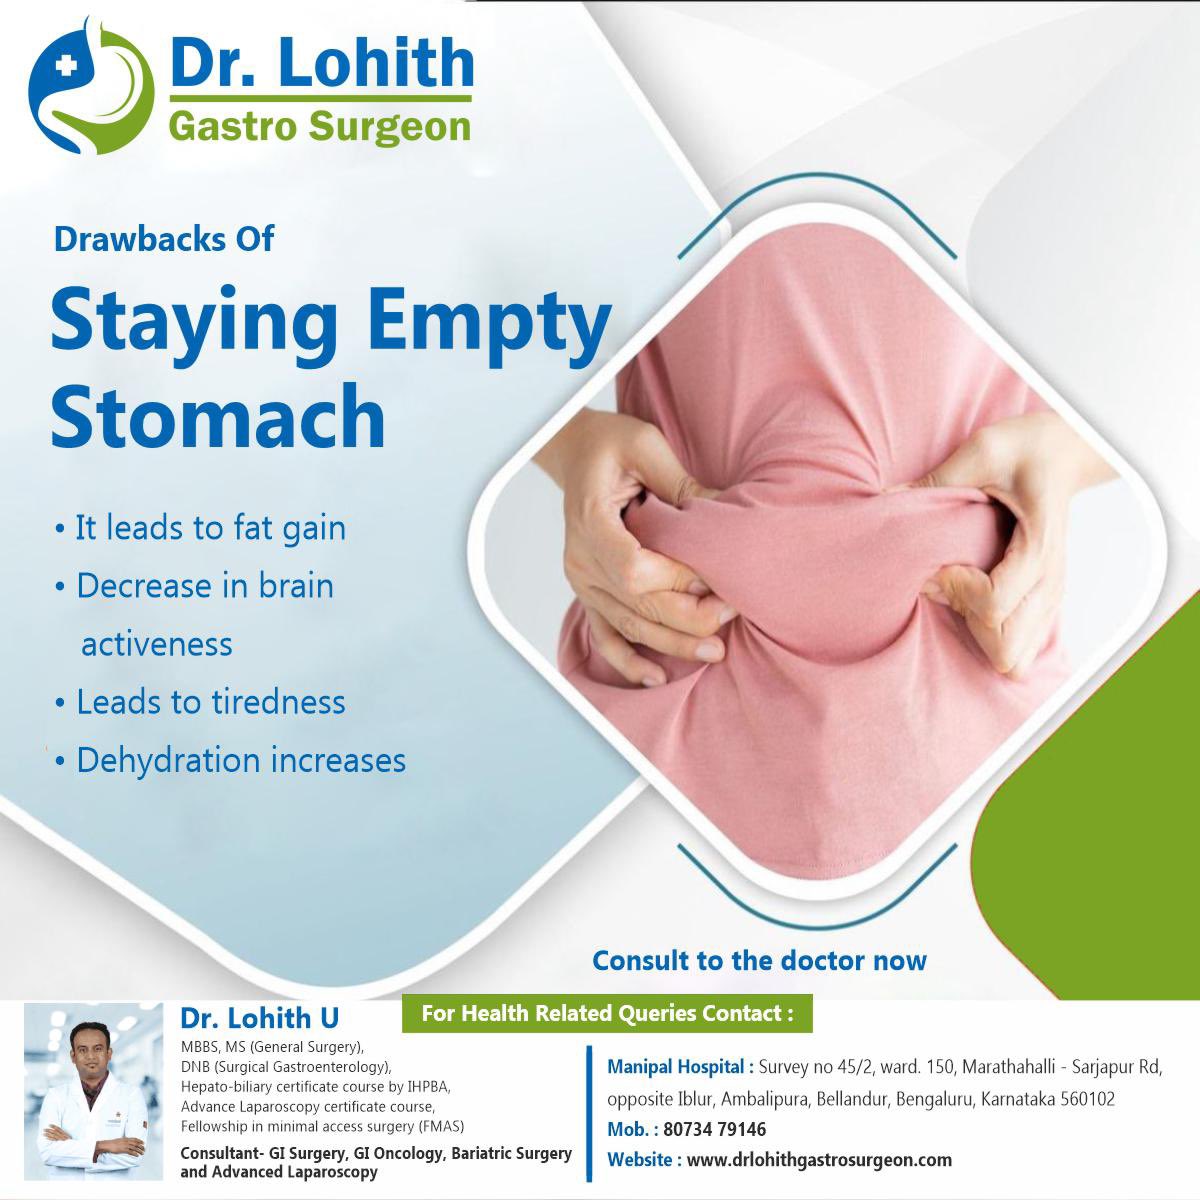 Drawbacks of staying empty stomach 

Book an appointment with our Best Gastroenterologist in Bangalore

#drlohithu #lohith #Sarjapur #emptystomach #fatgain #brain #tiredness #dehydration #donor #liverdiseases #livercancers #livercirrhosis #sleepearly #gastroenterology #gastrocare